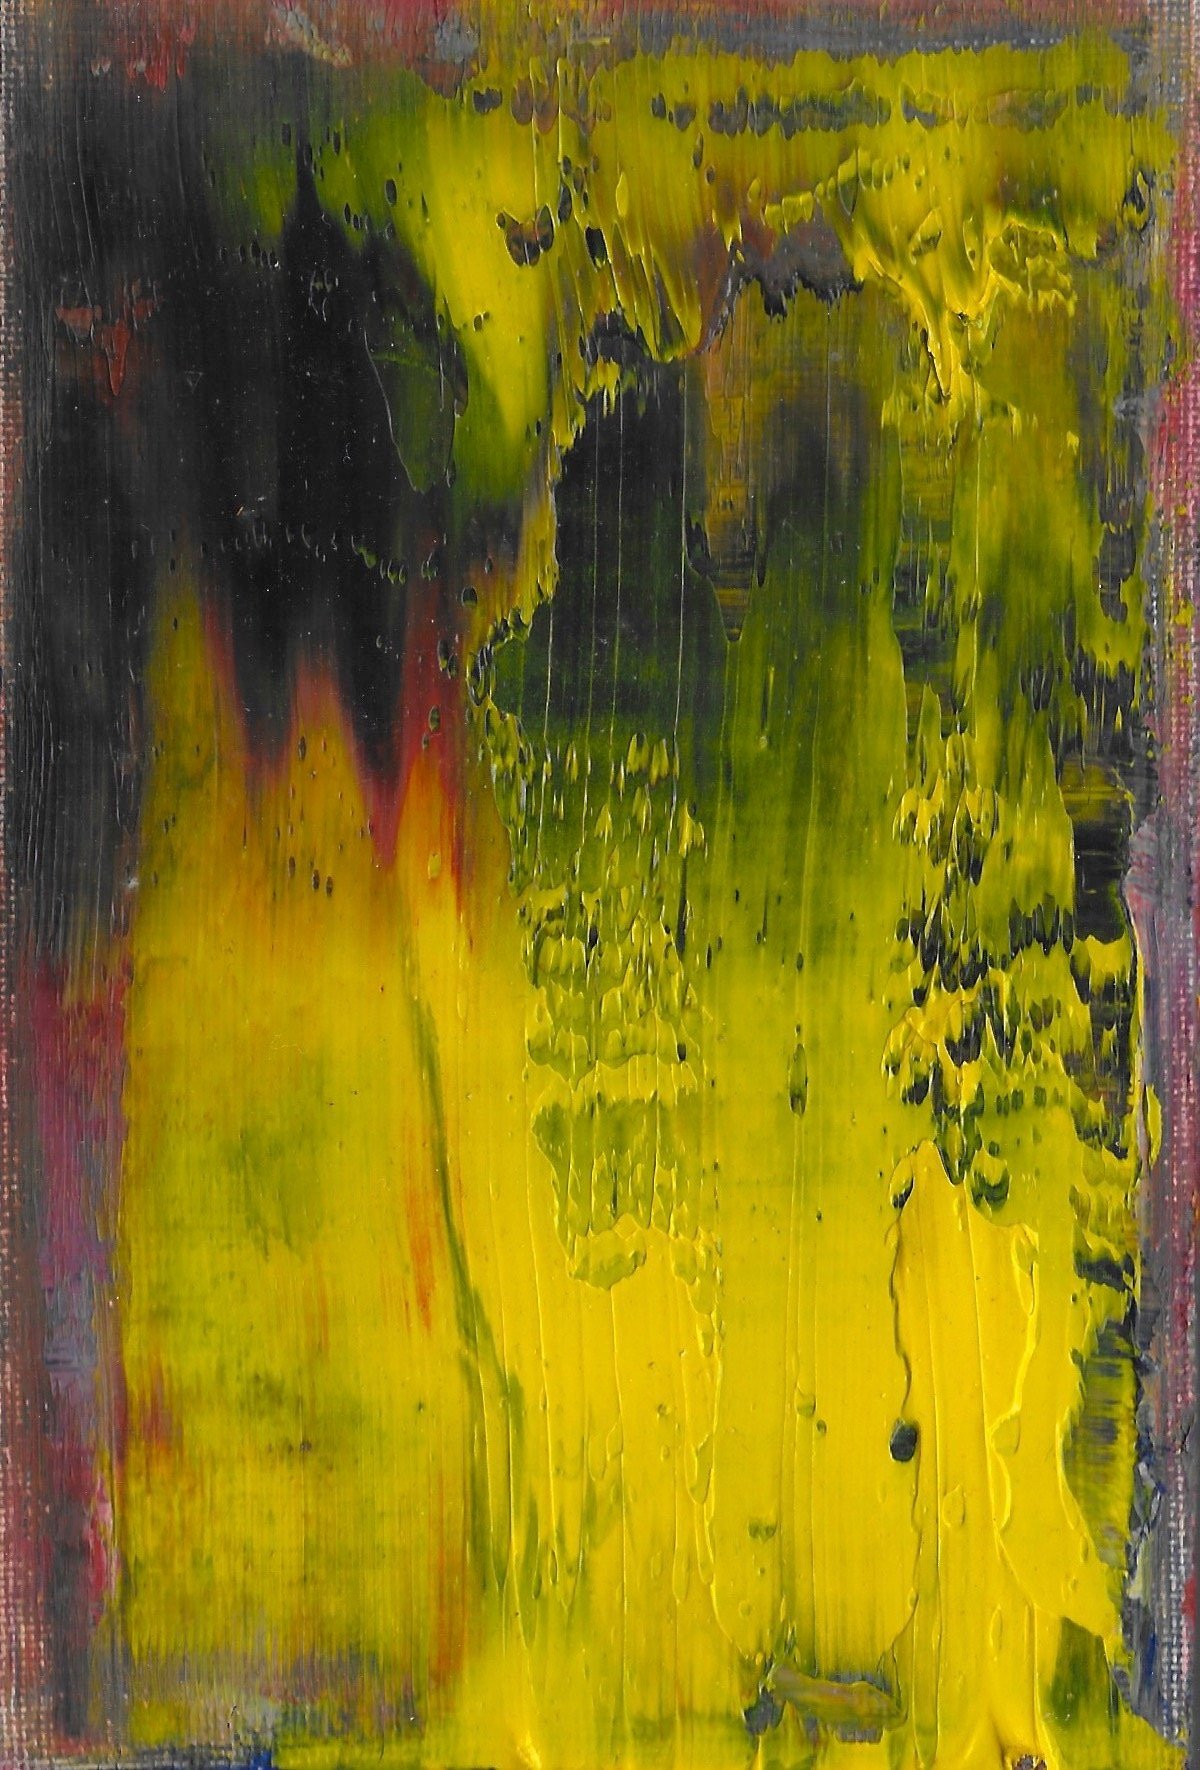  Abstract #21  Oil on panel. 10cm x 15cm (4in x 6in.) 2022. Maxime Mballa-Tagny.   Click here to inquire.  